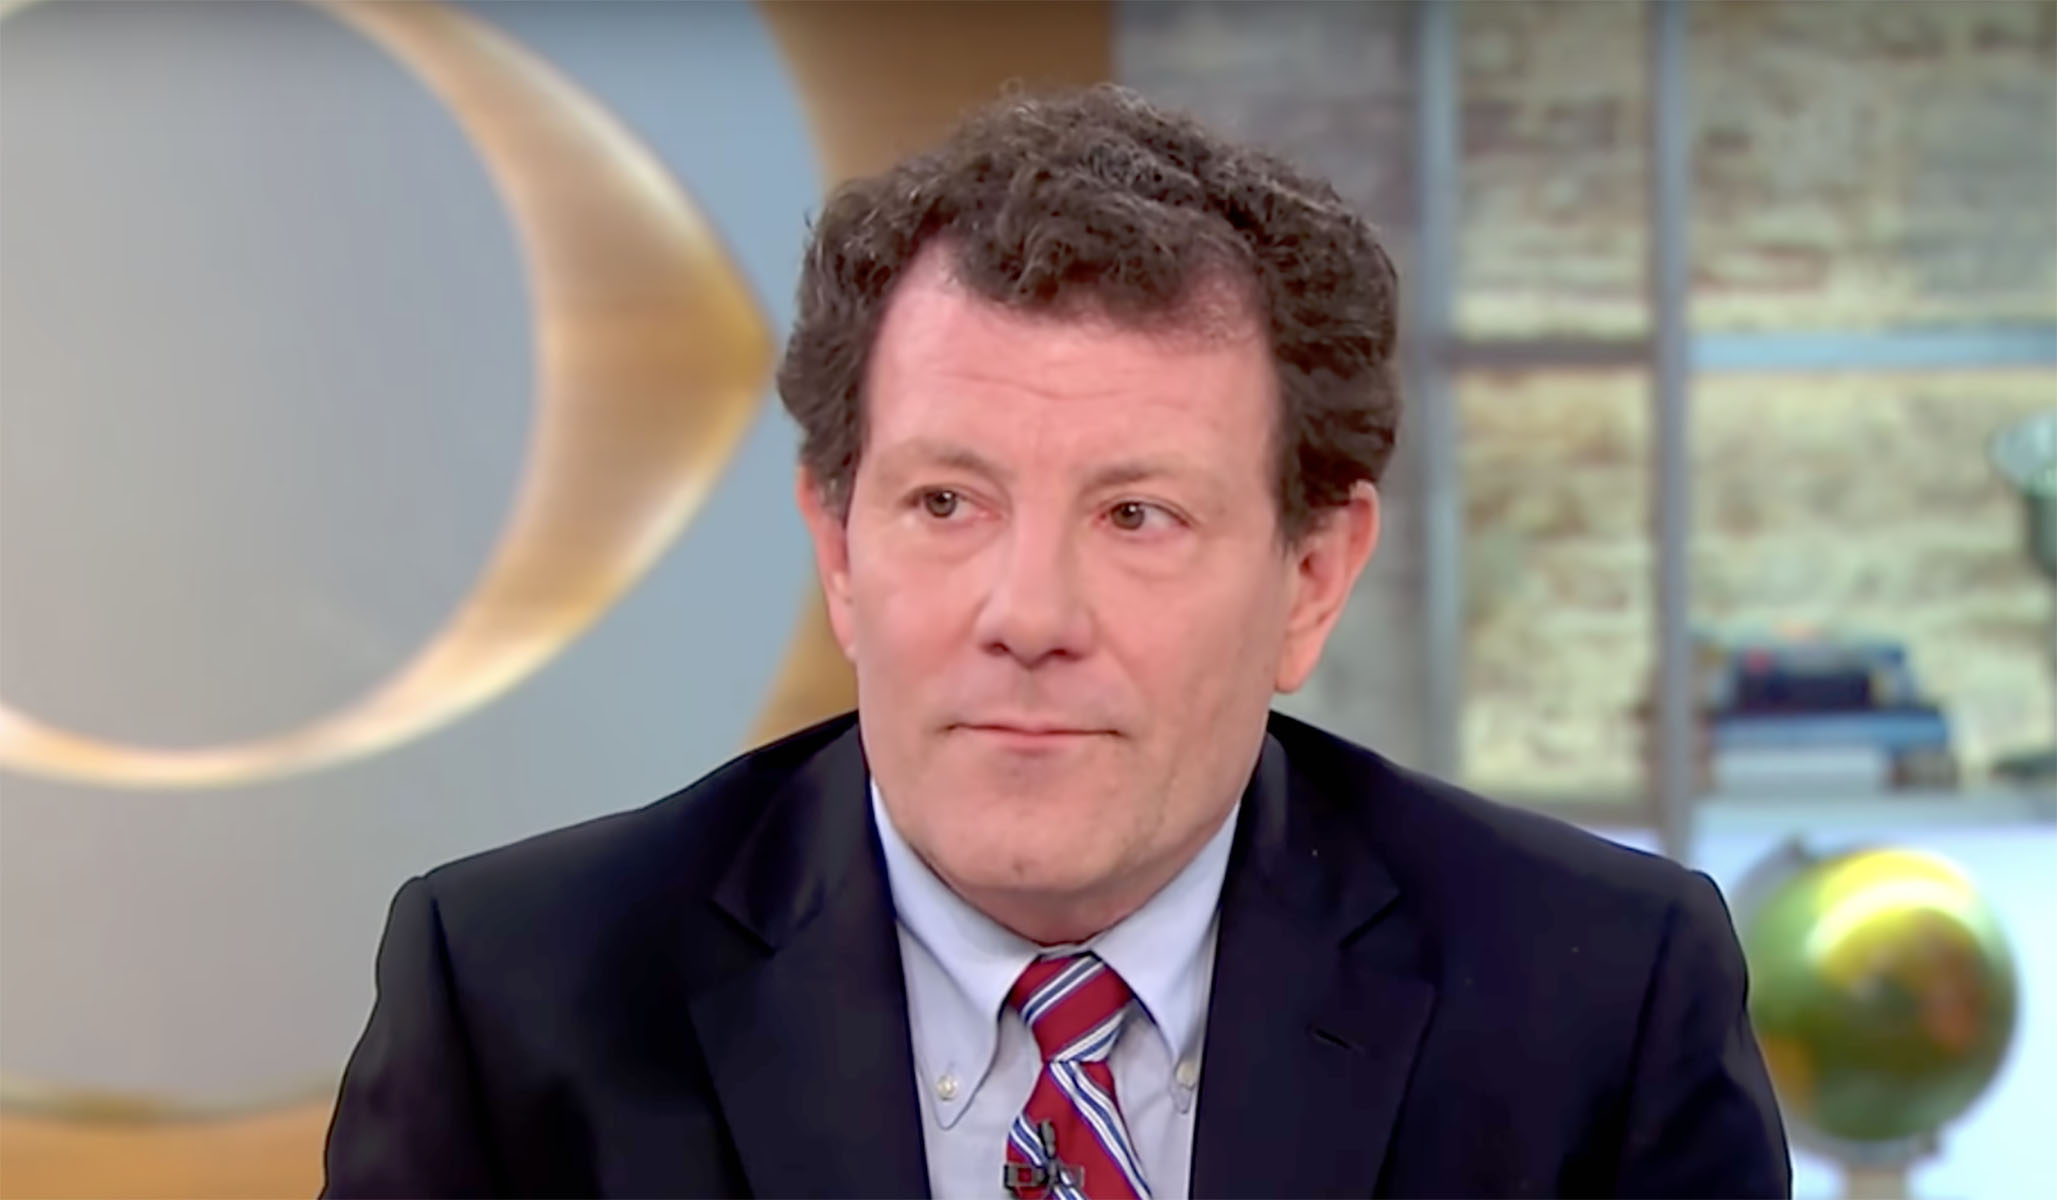 History reveals: Nicholas Kristof  for political office? Delusional  

